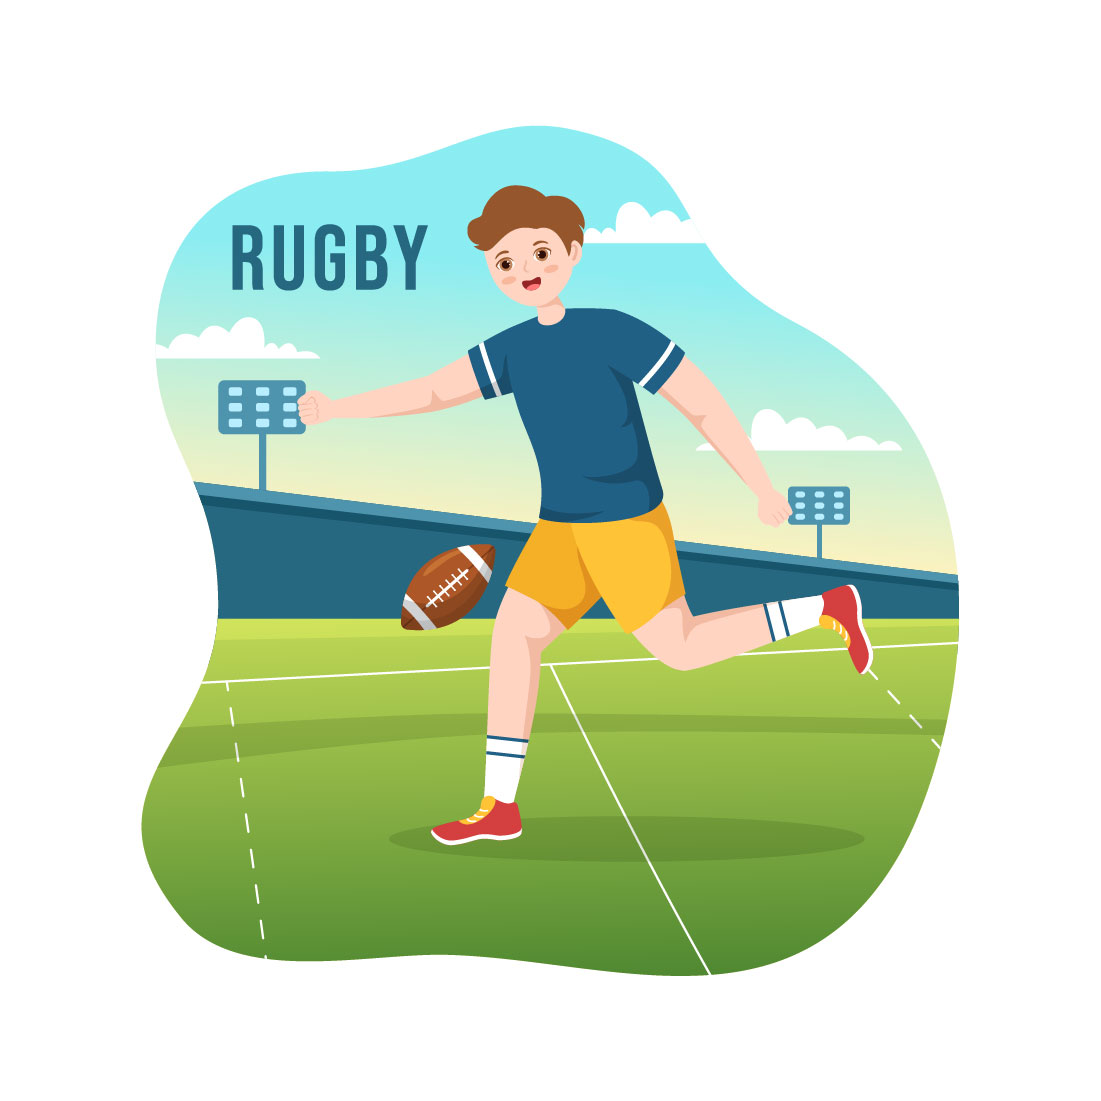 11 Rugby Player Illustration cover image.